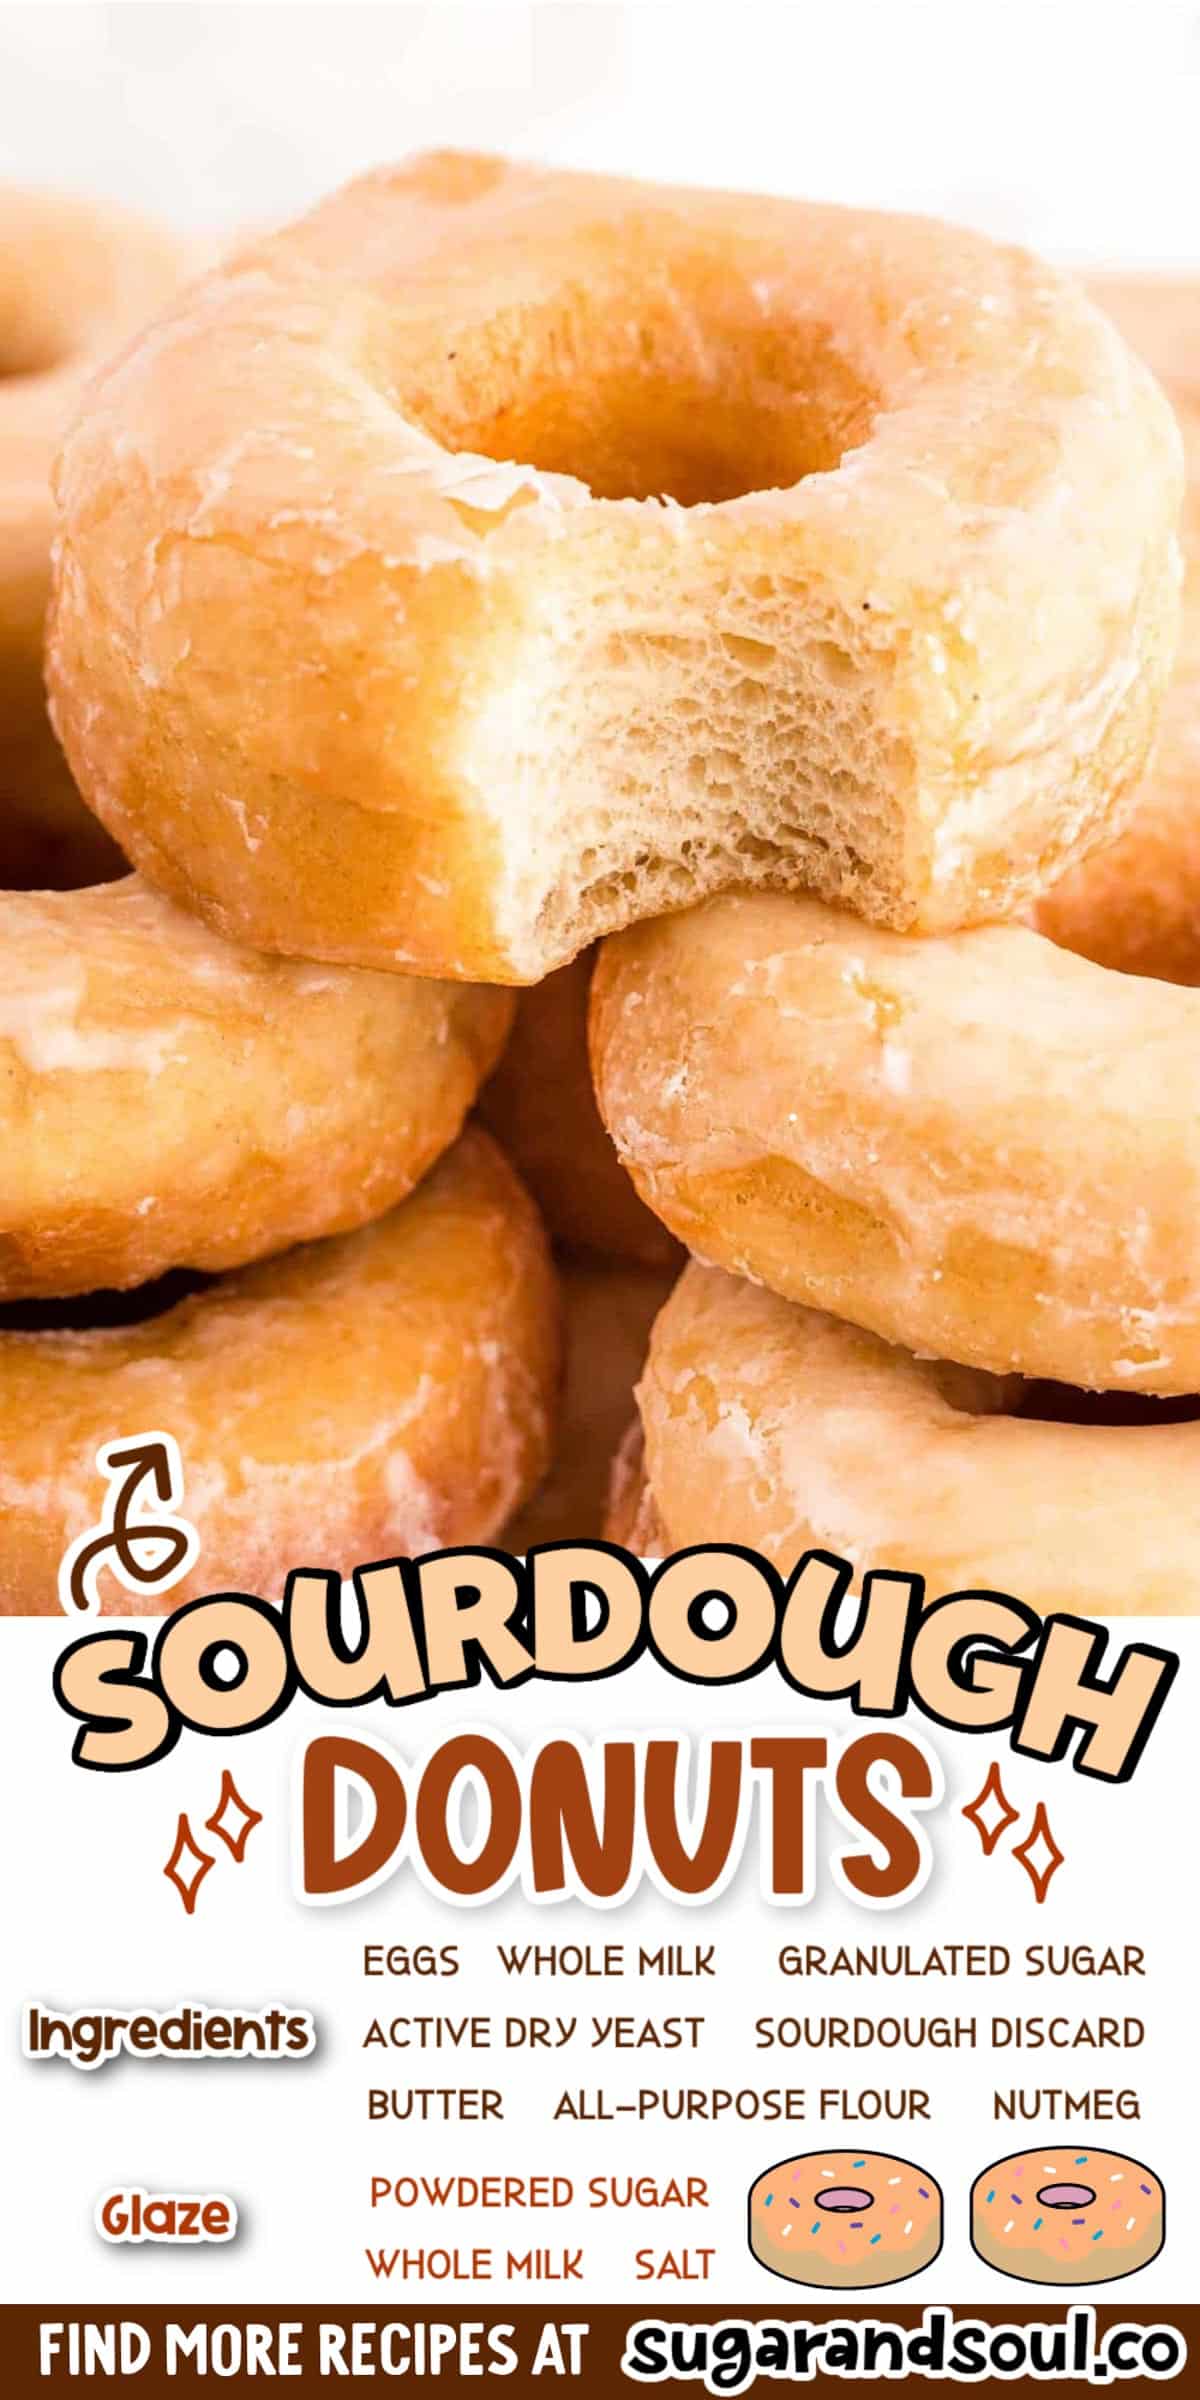 These Sourdough Donuts are made with discard, deep-fried to golden brown perfection, and then covered in an easy 3-ingredient sweet glaze! Prep these delicious homemade donuts in just 45 minutes! via @sugarandsoulco